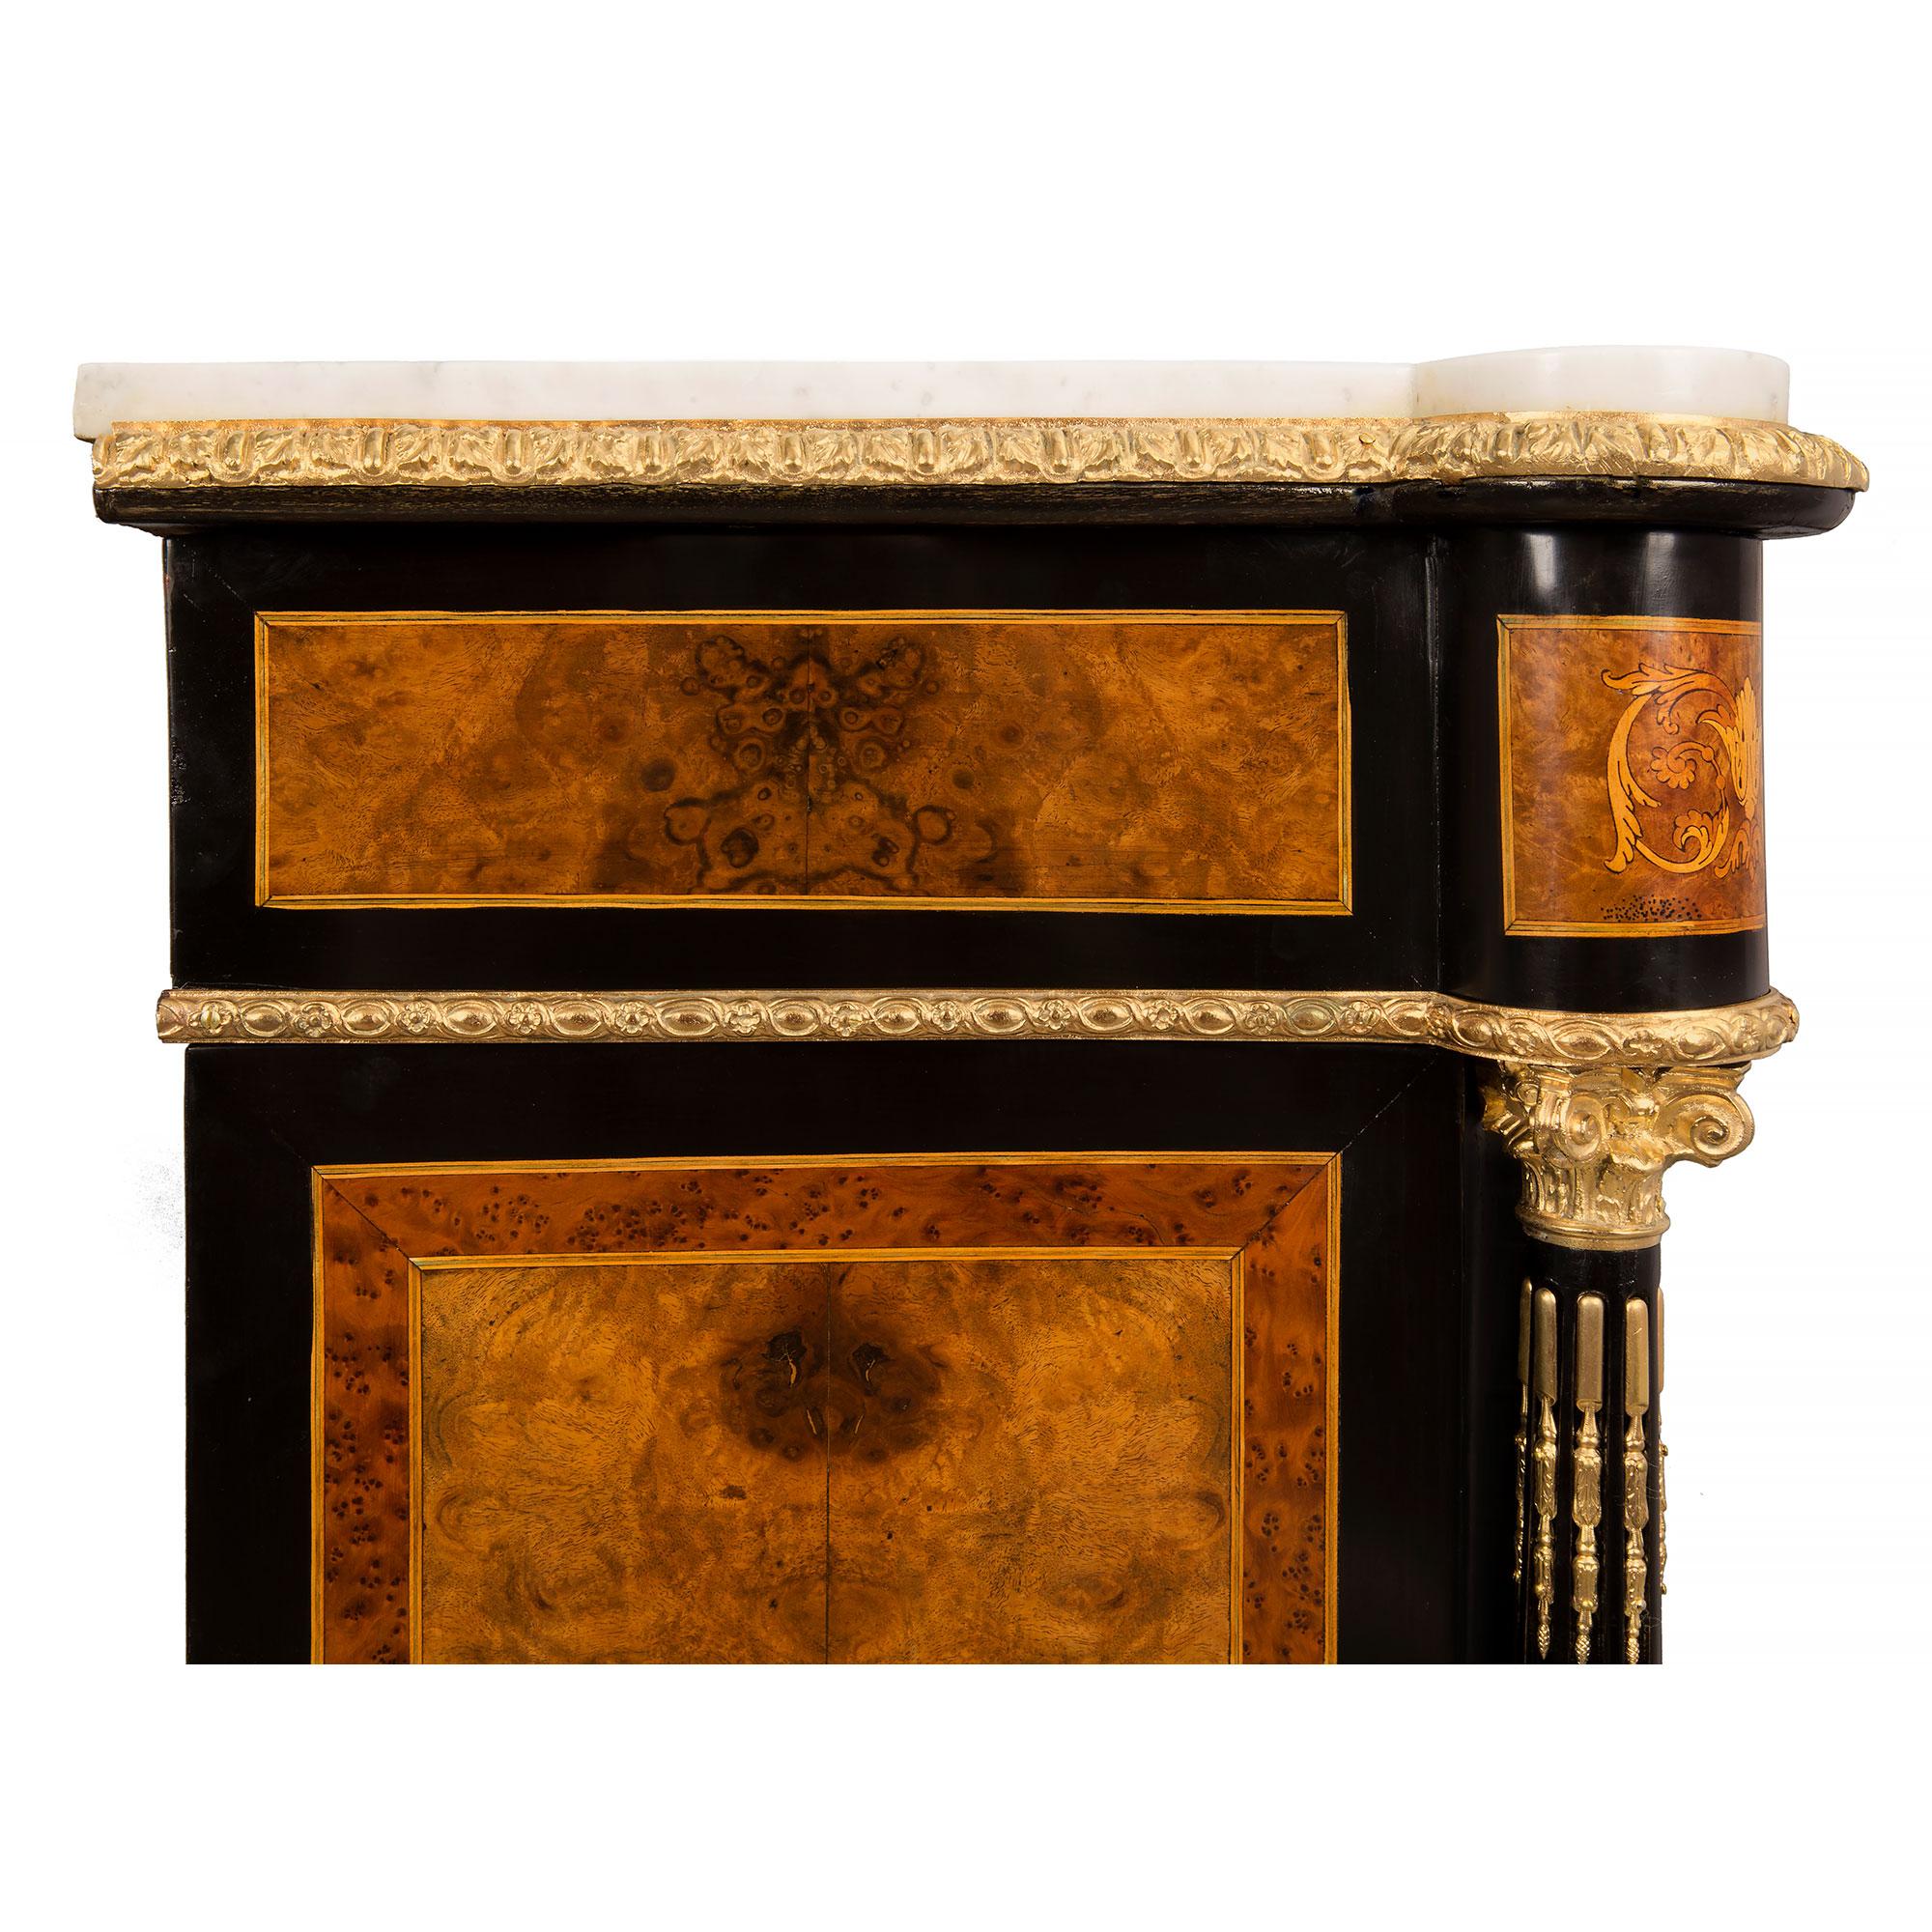 French 19th Century Napoleon III Period Exotic Wood, Ormolu and Marble Cabinet For Sale 3